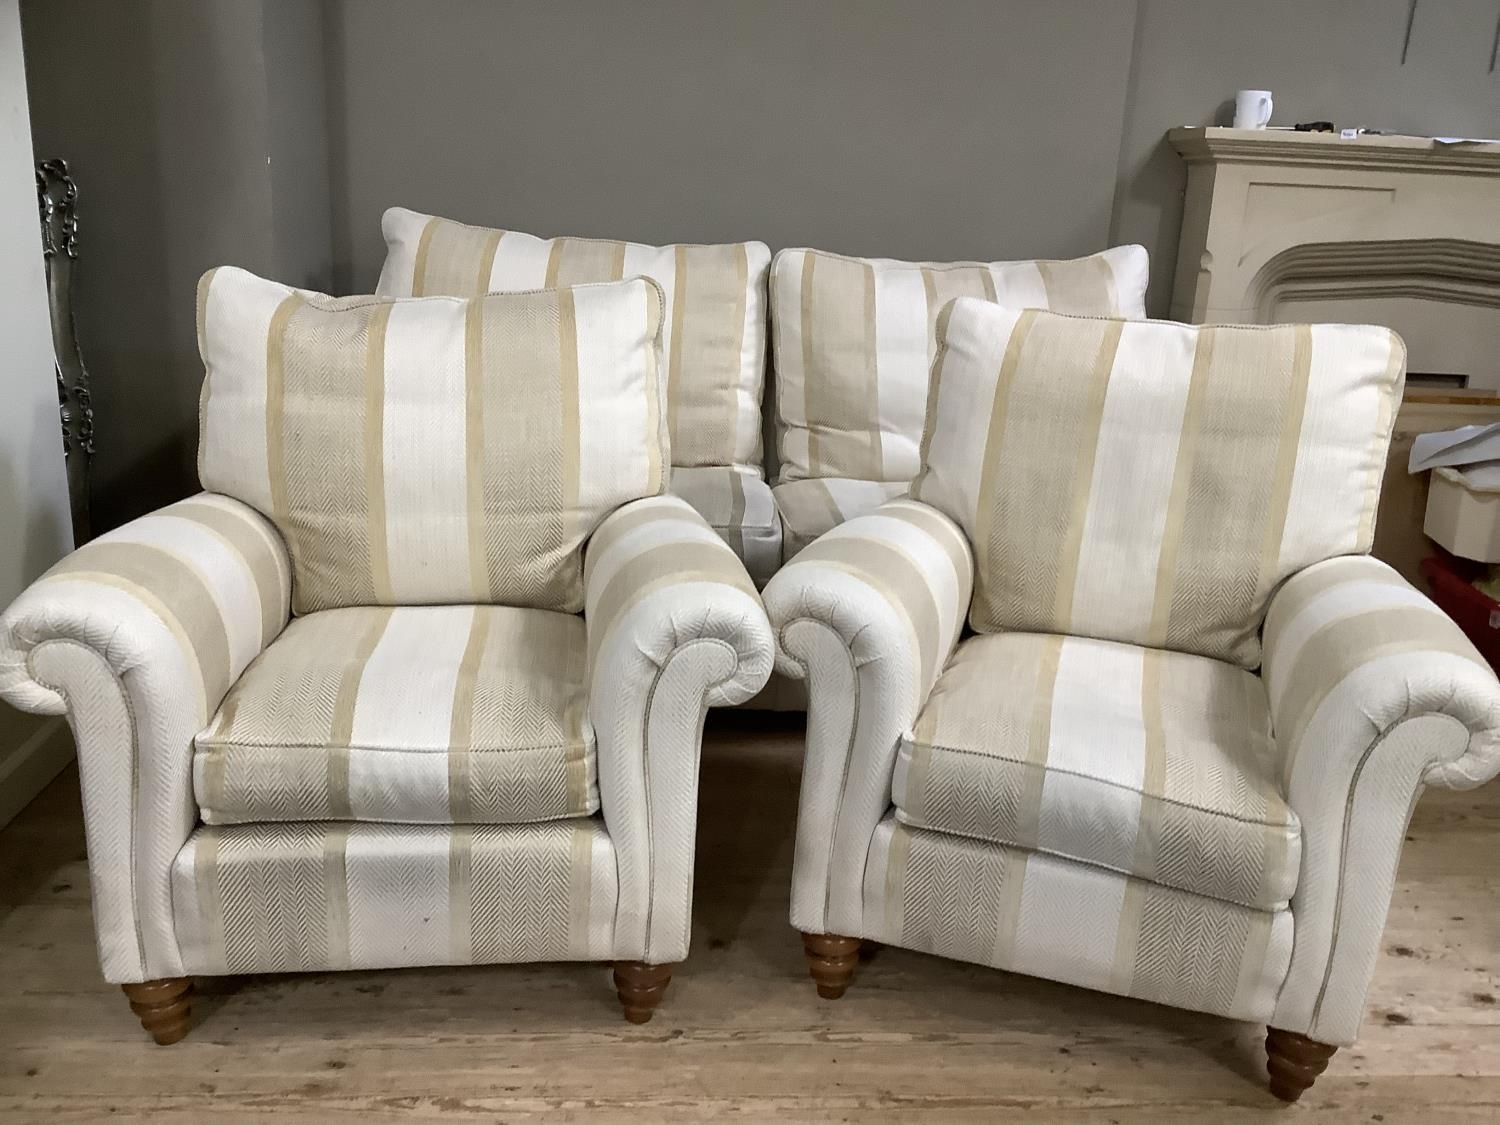 A Duresta three seater sofa upholstered in ecru and cream herringbone fabric together with two - Image 3 of 12